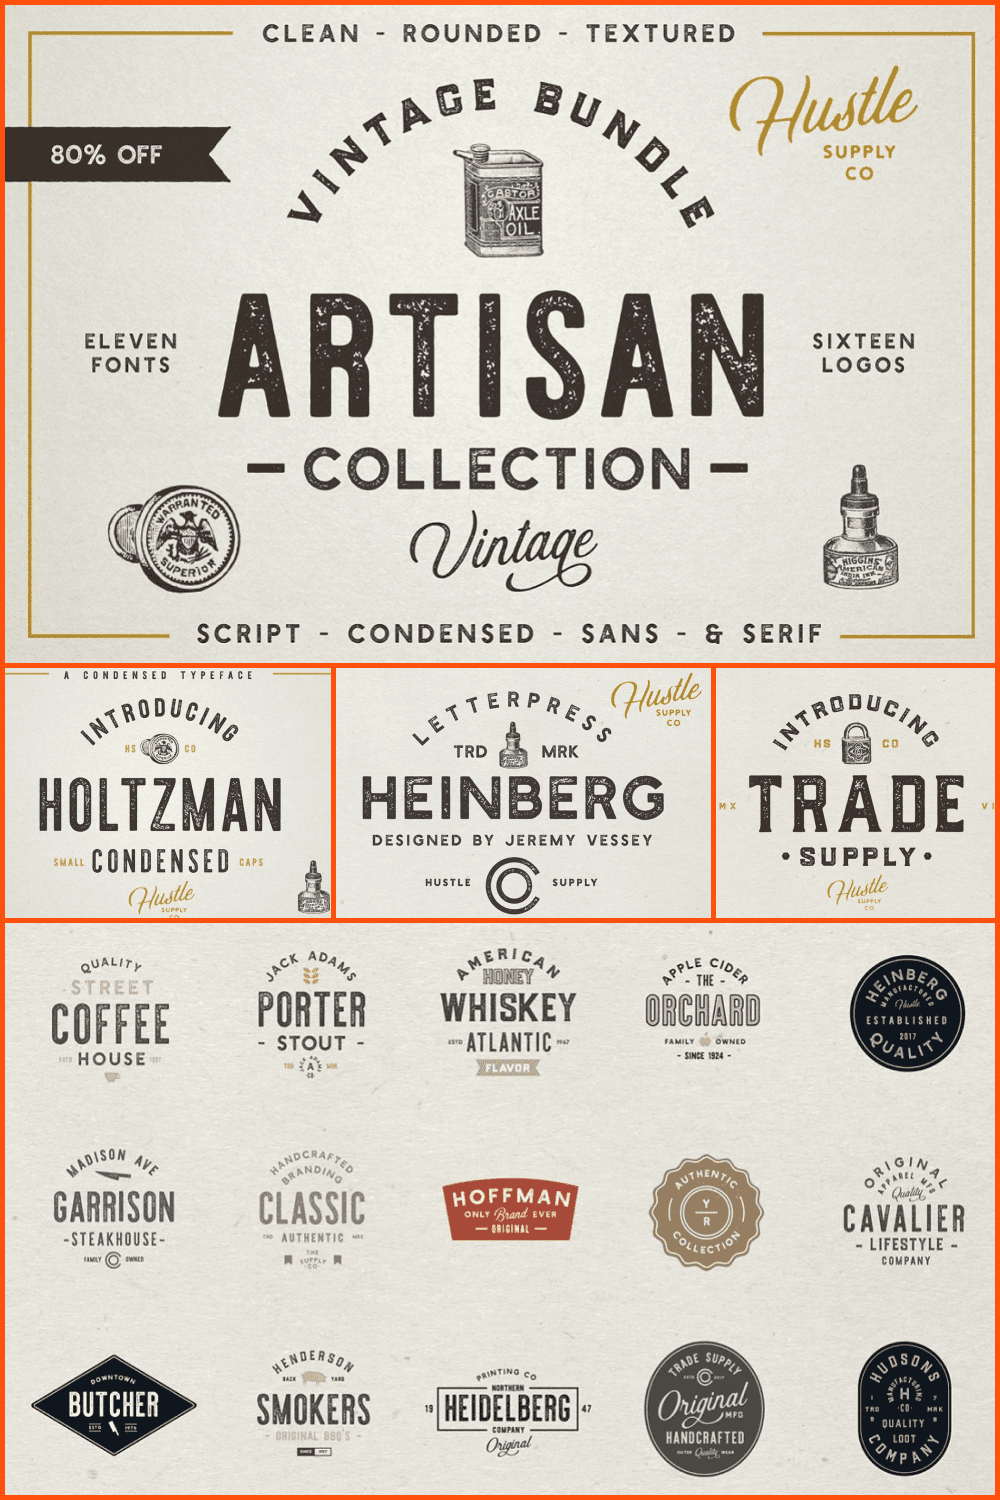 Artisan Collection by Hustle Supply C.